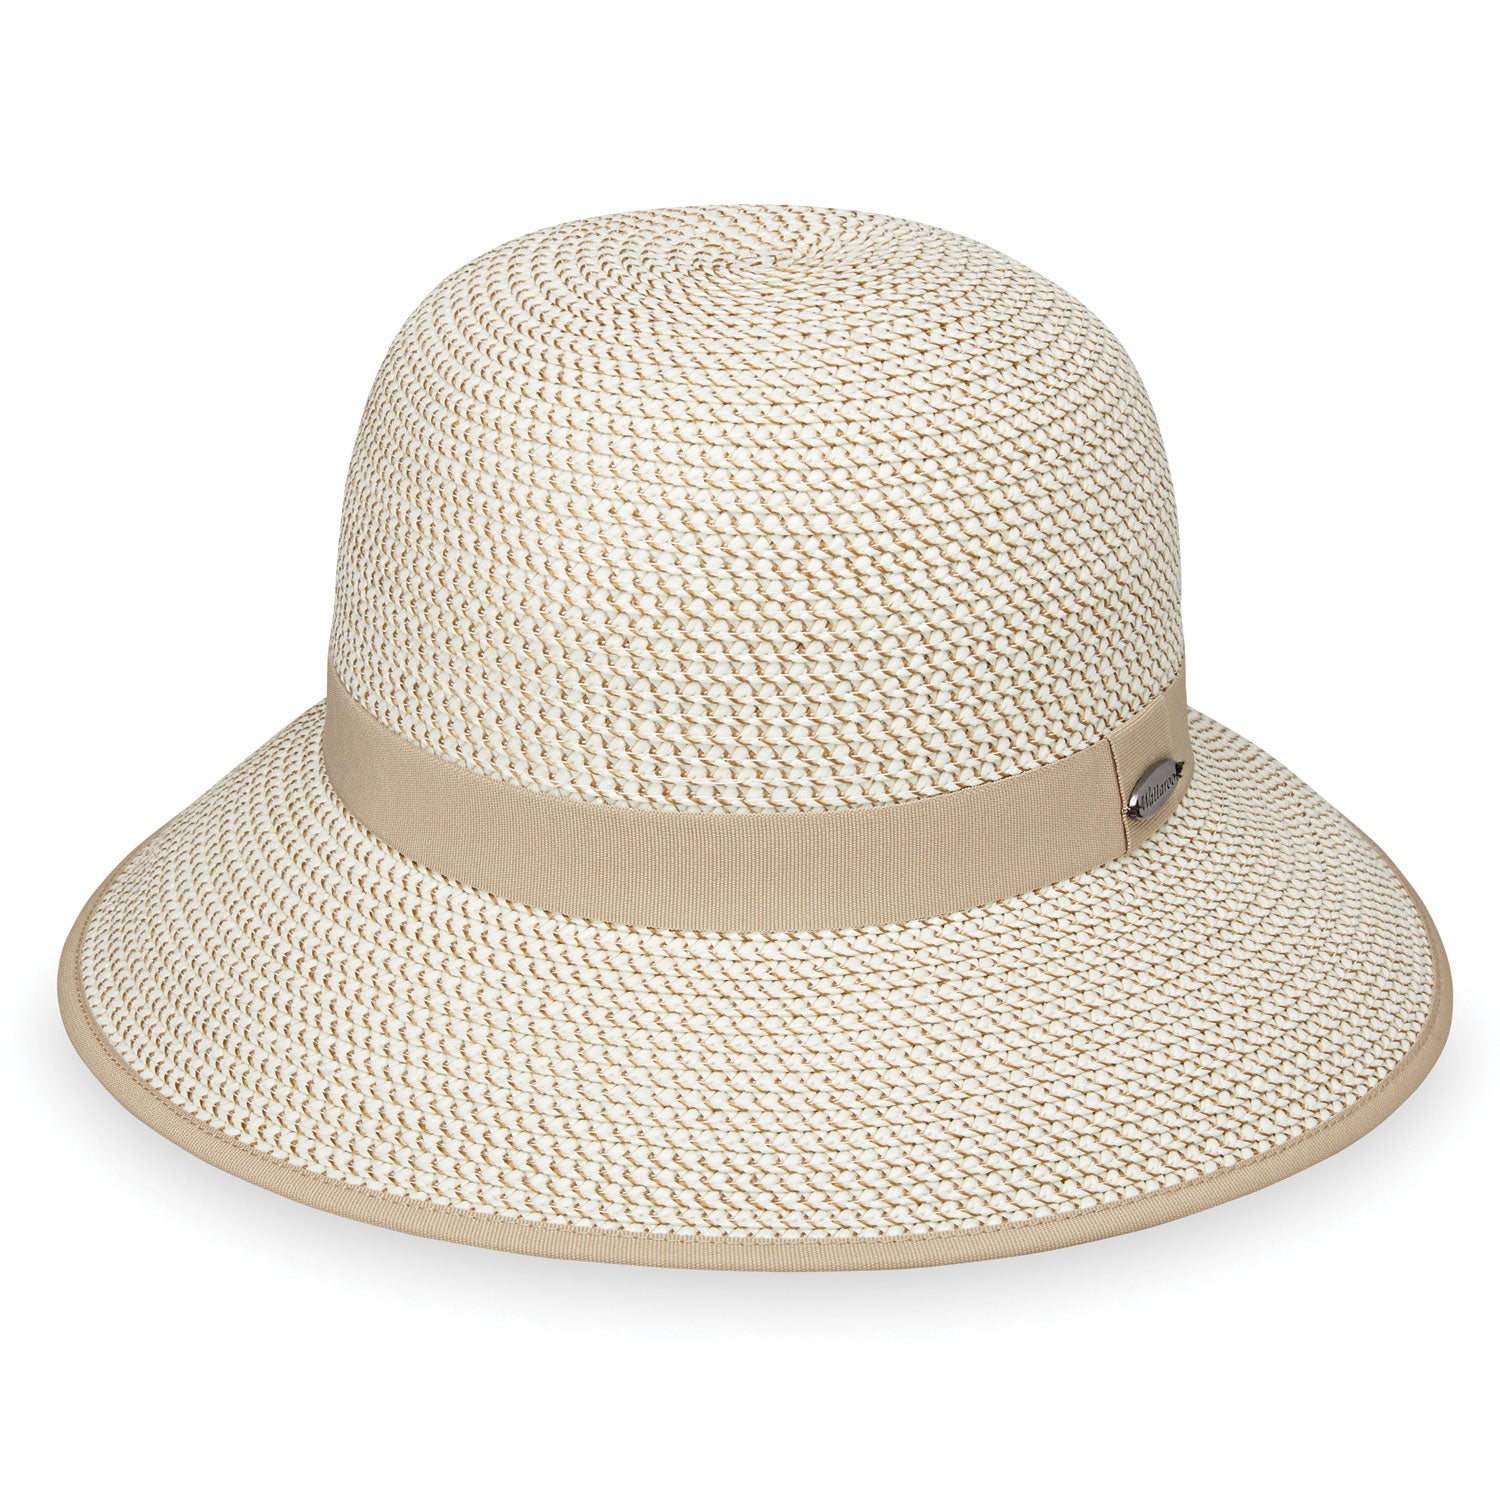 Featuring Darby Big Wide Brim Sun Protection Hat in Ivory Taupe from Wallaroo